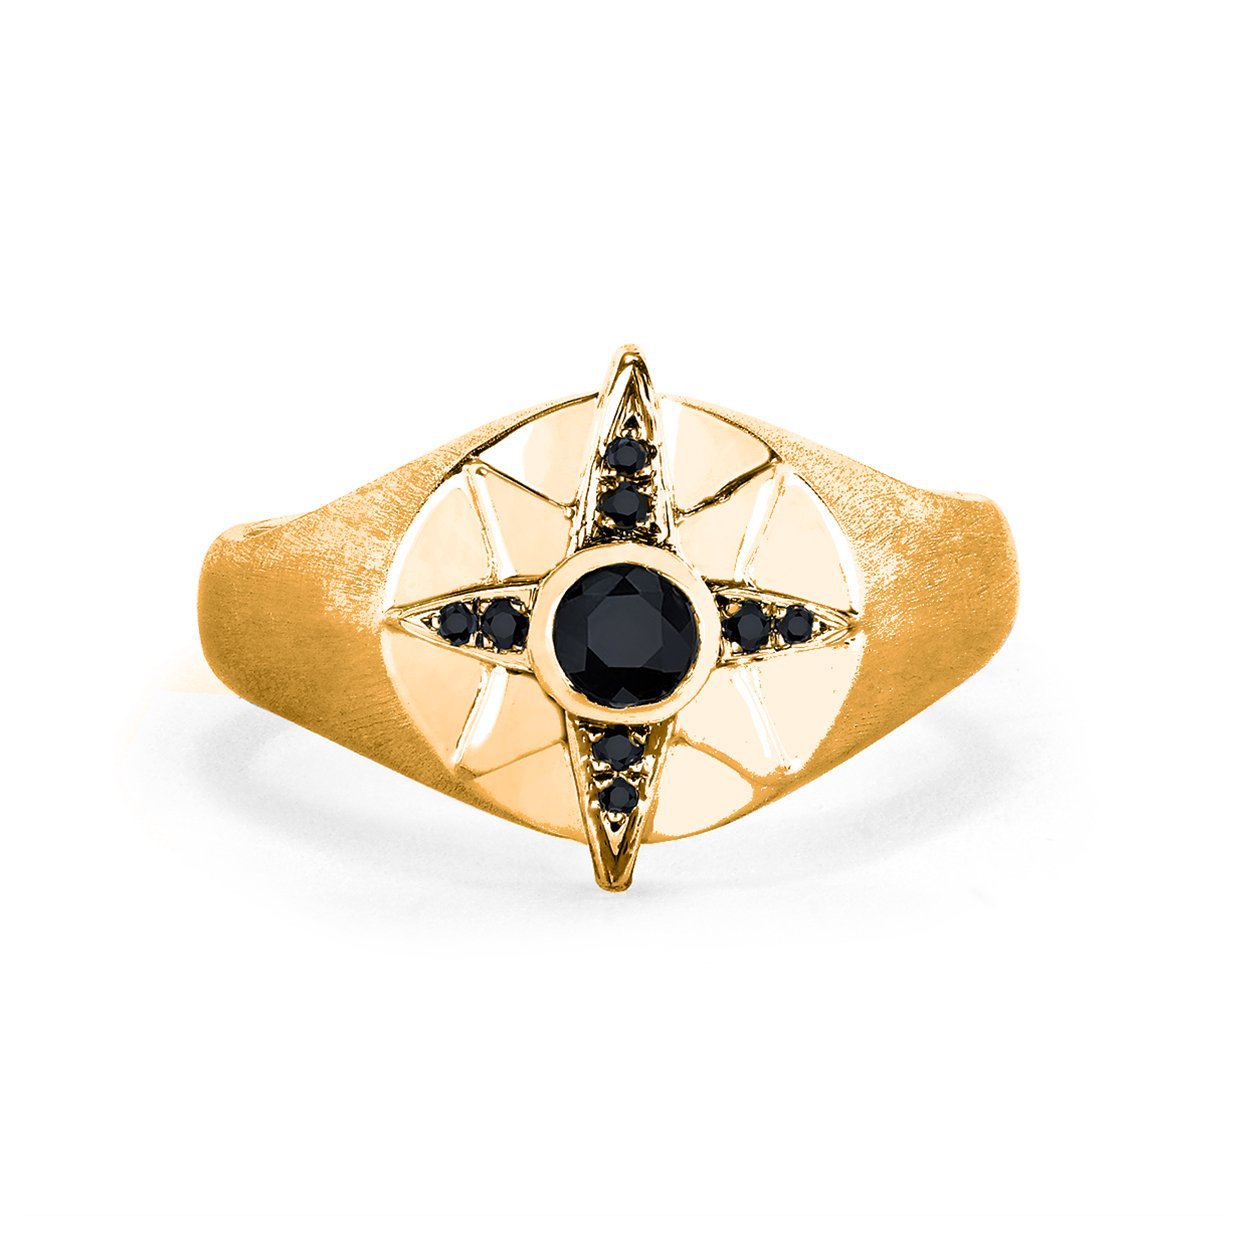 Hex Signet Ring with Topographic Engraving in 18K Gold - Baxter Moerman